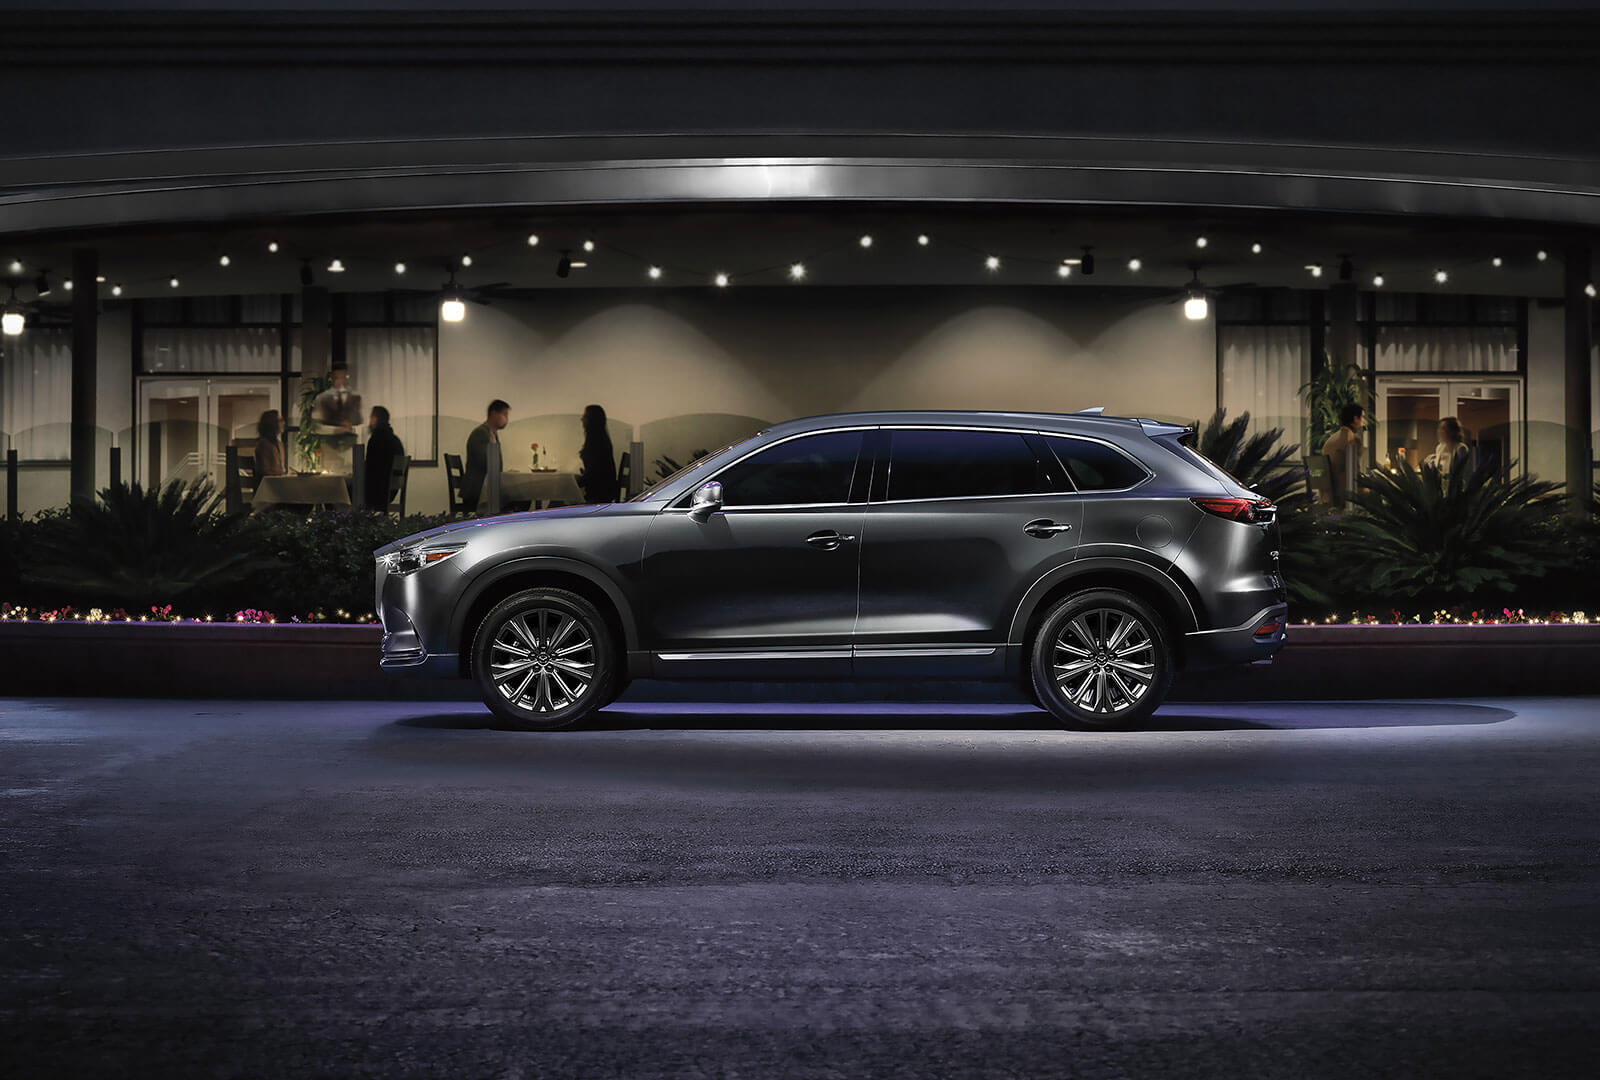 Polymetal Grey Metallic CX-9 reflects streetlights in front of a restaurant patio at night.